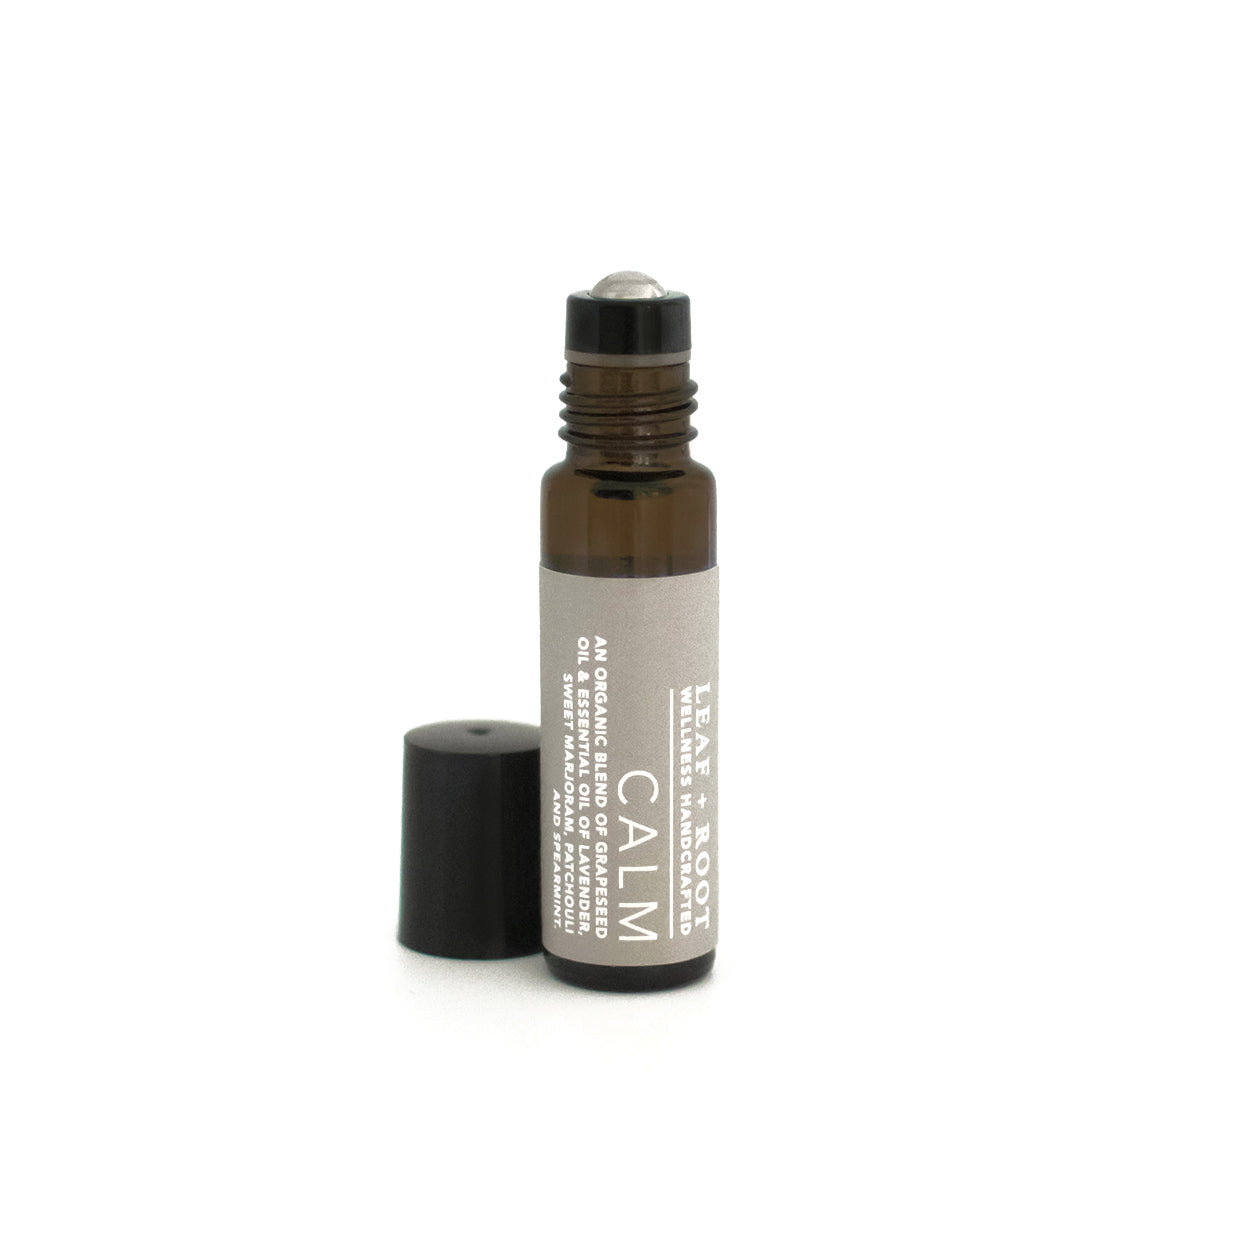 Calm Aromatherapy Roll On by Leaf + Root